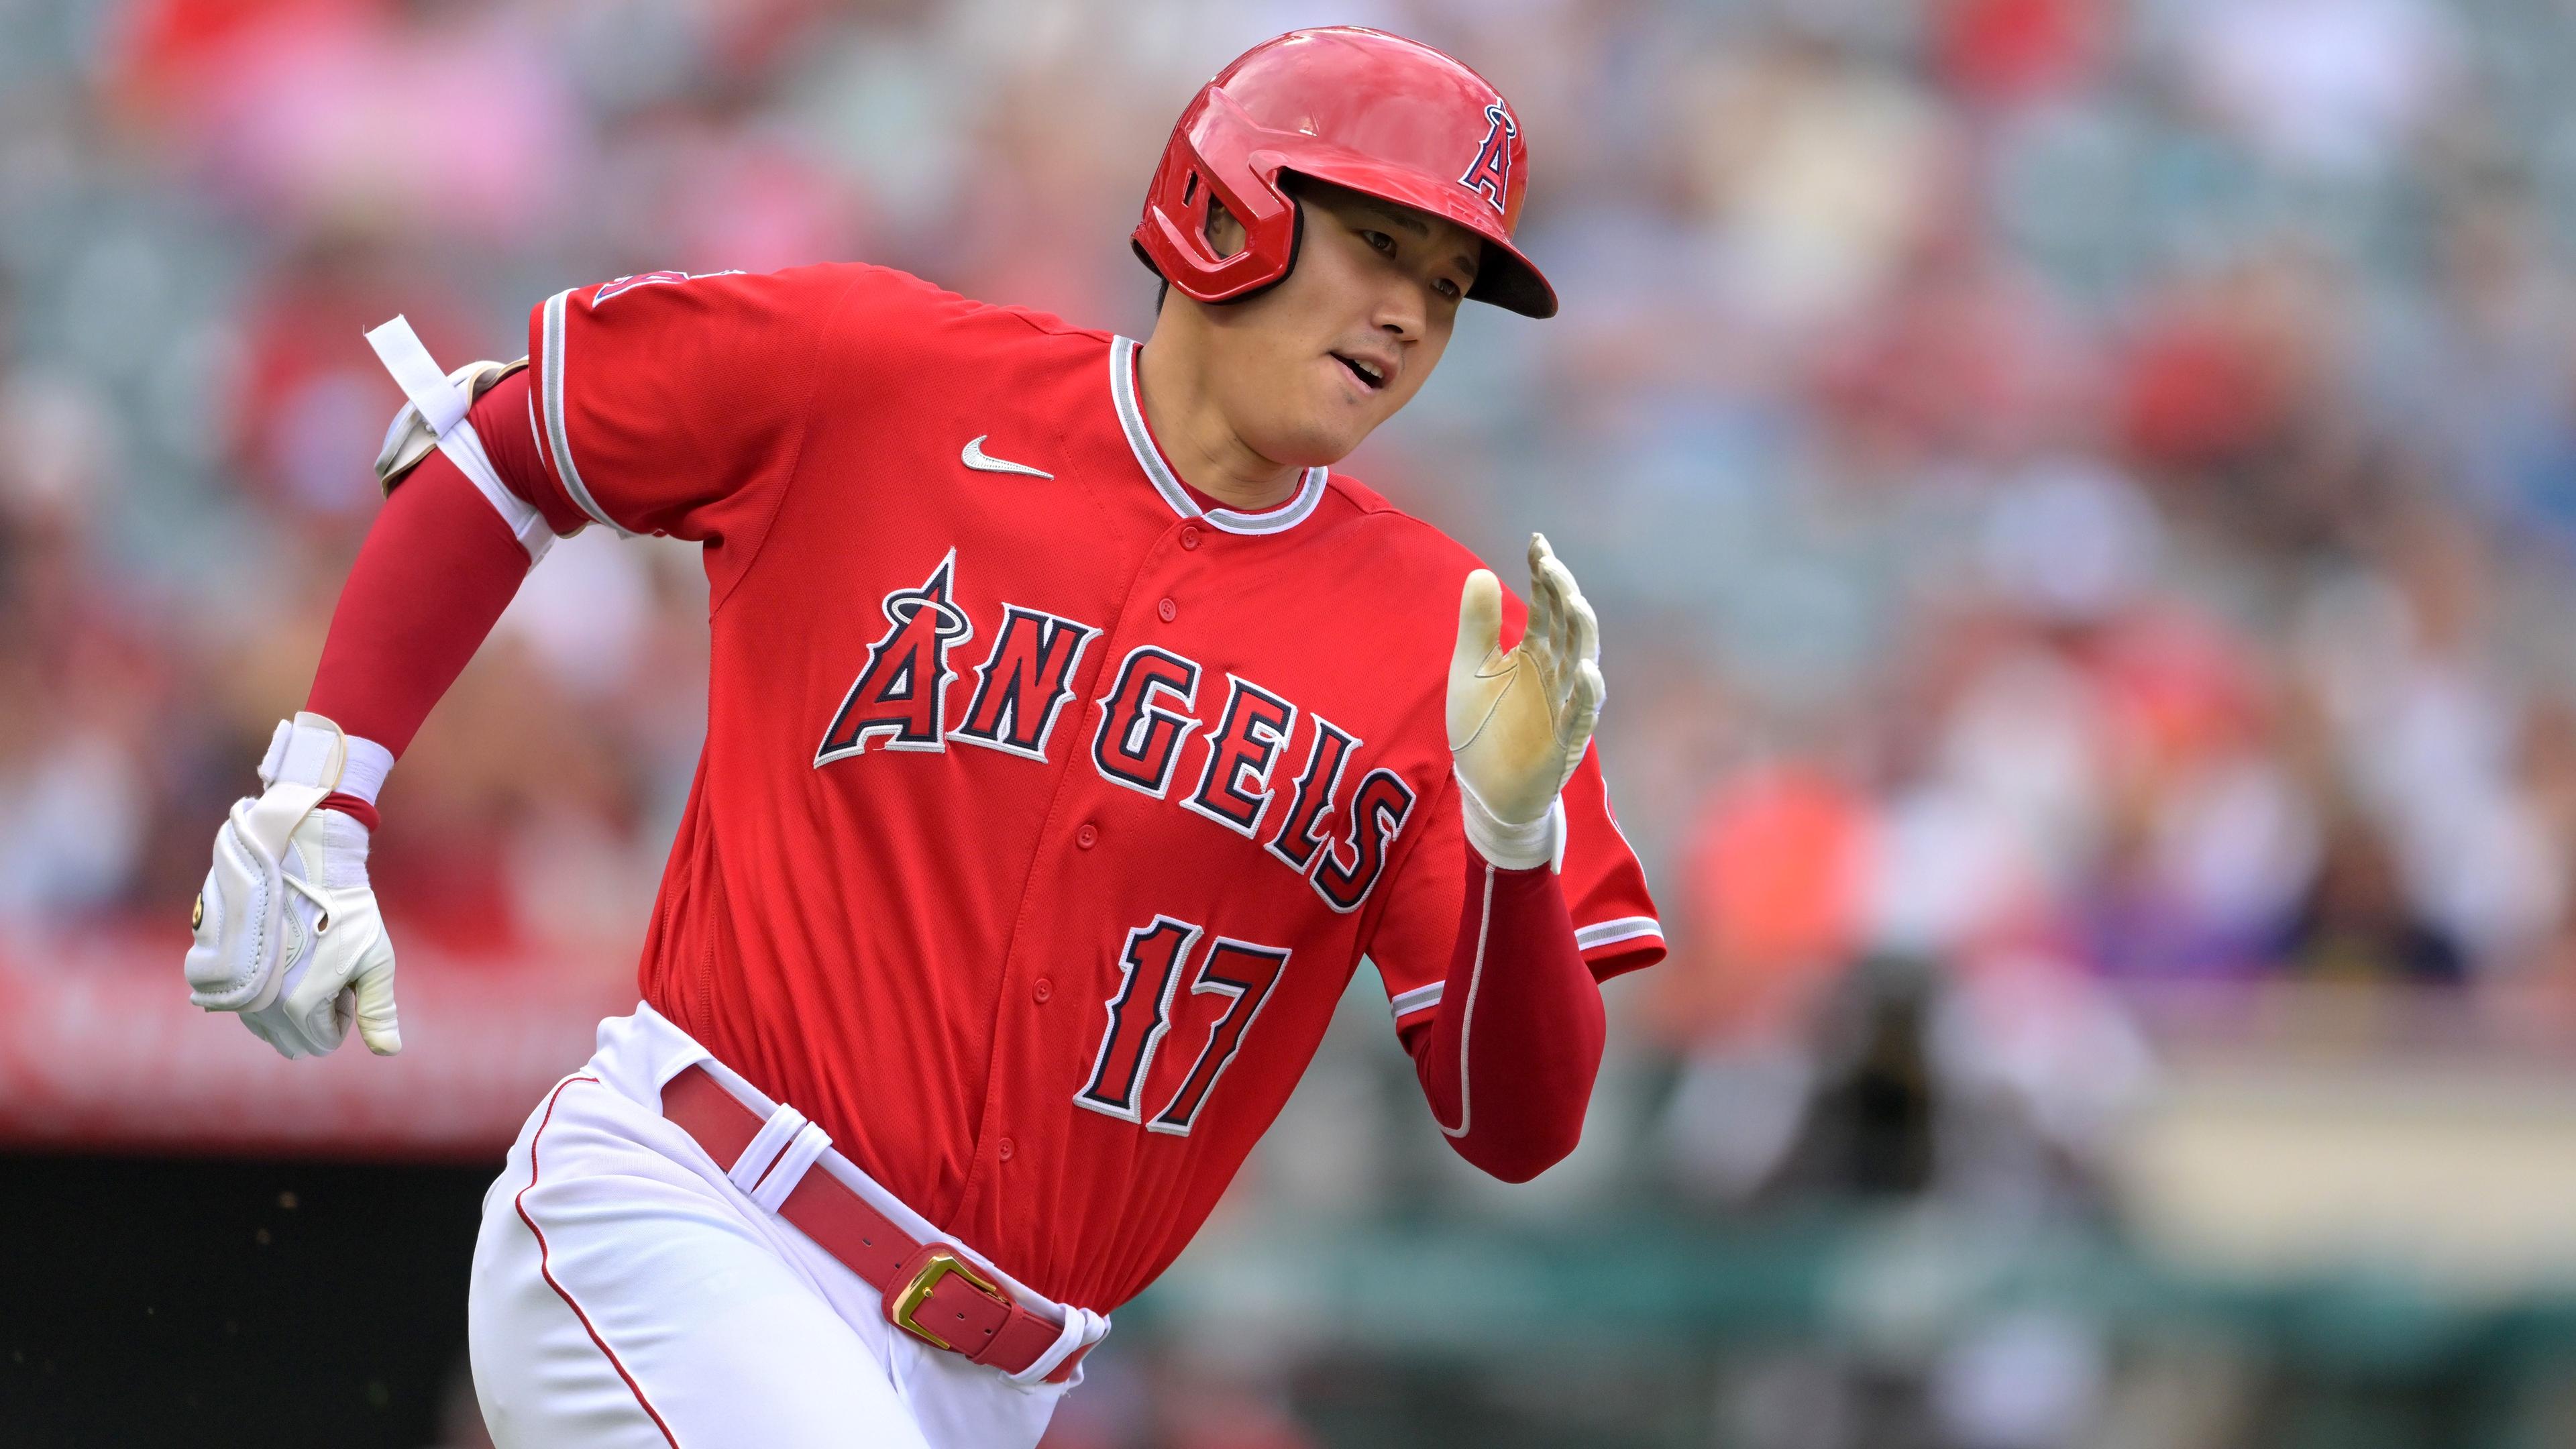 Los Angeles Angels designated hitter Shohei Ohtani (17) rounds the bases on a triple in the first inning against the Texas Rangers at Angel Stadium. / Jayne Kamin-Oncea-USA TODAY Sports